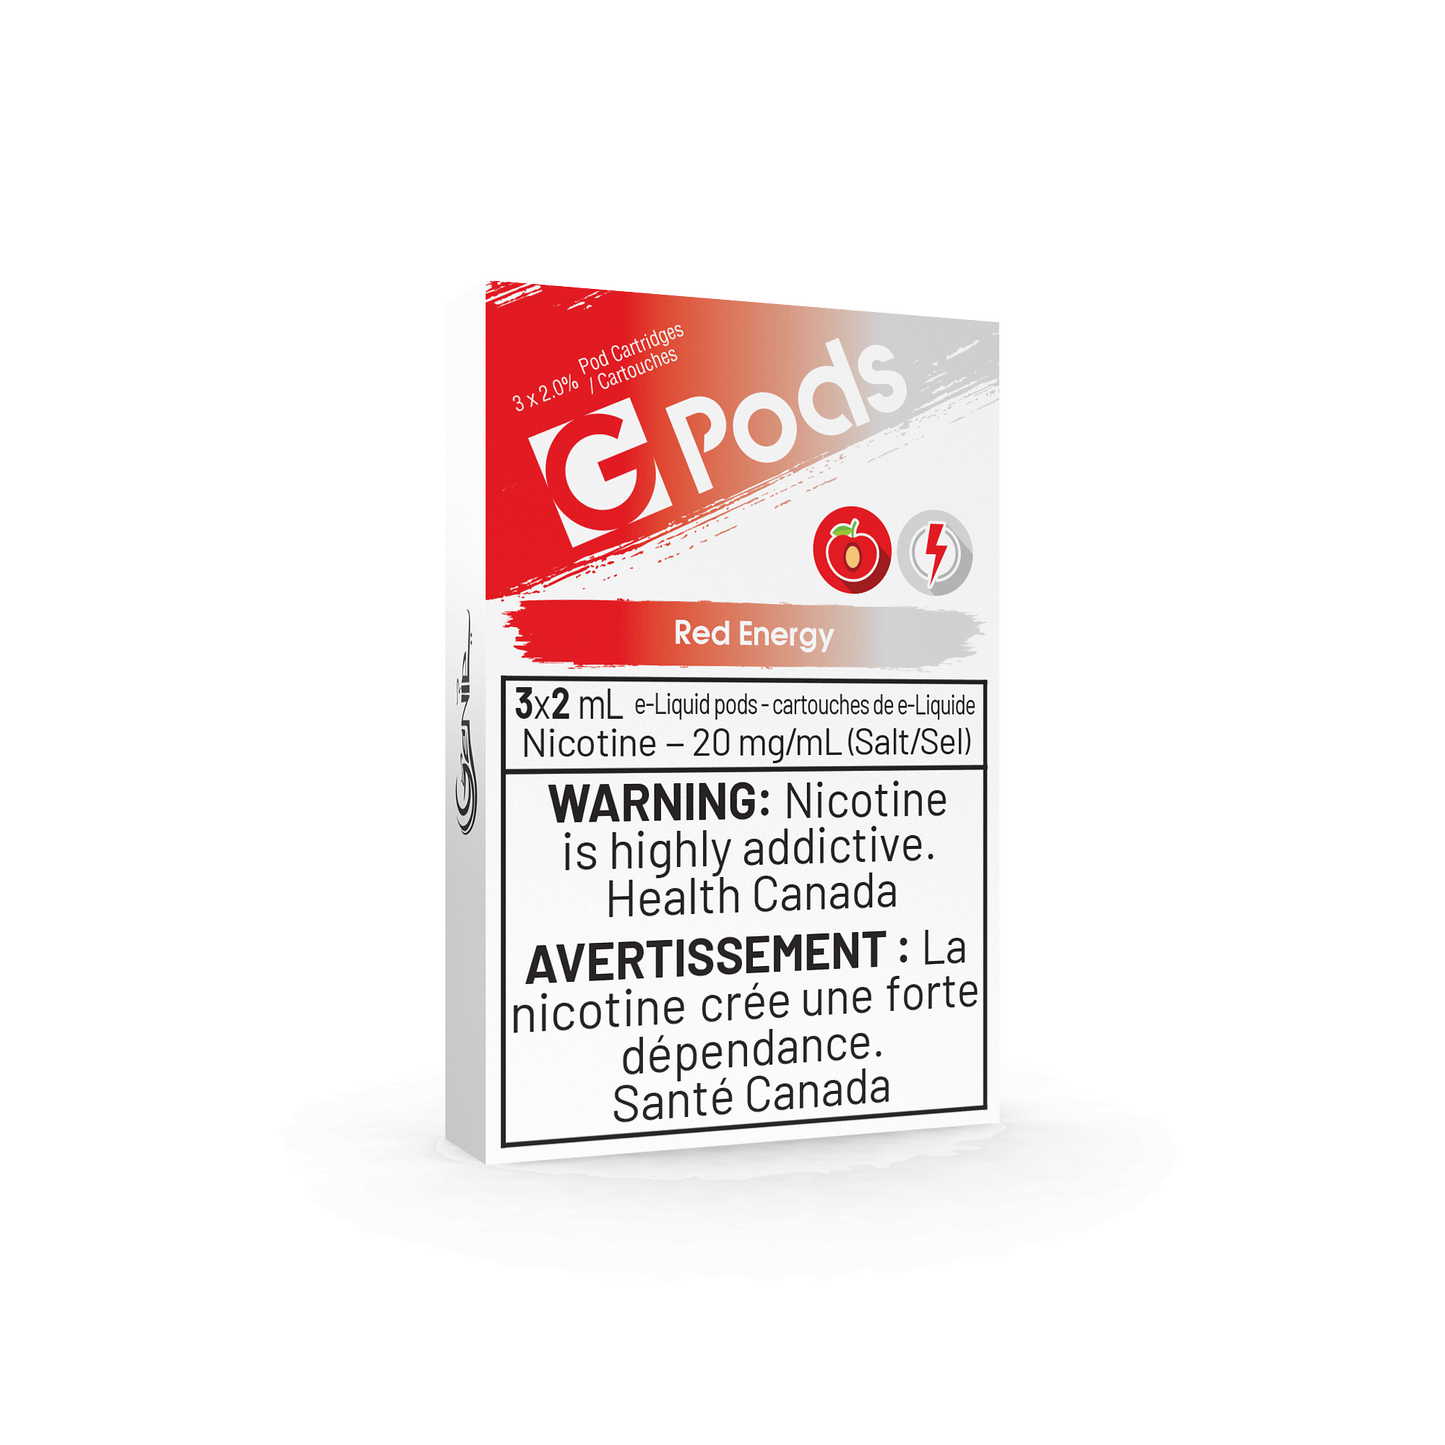 STLTH G PODS - RED ENERGY 20 MG